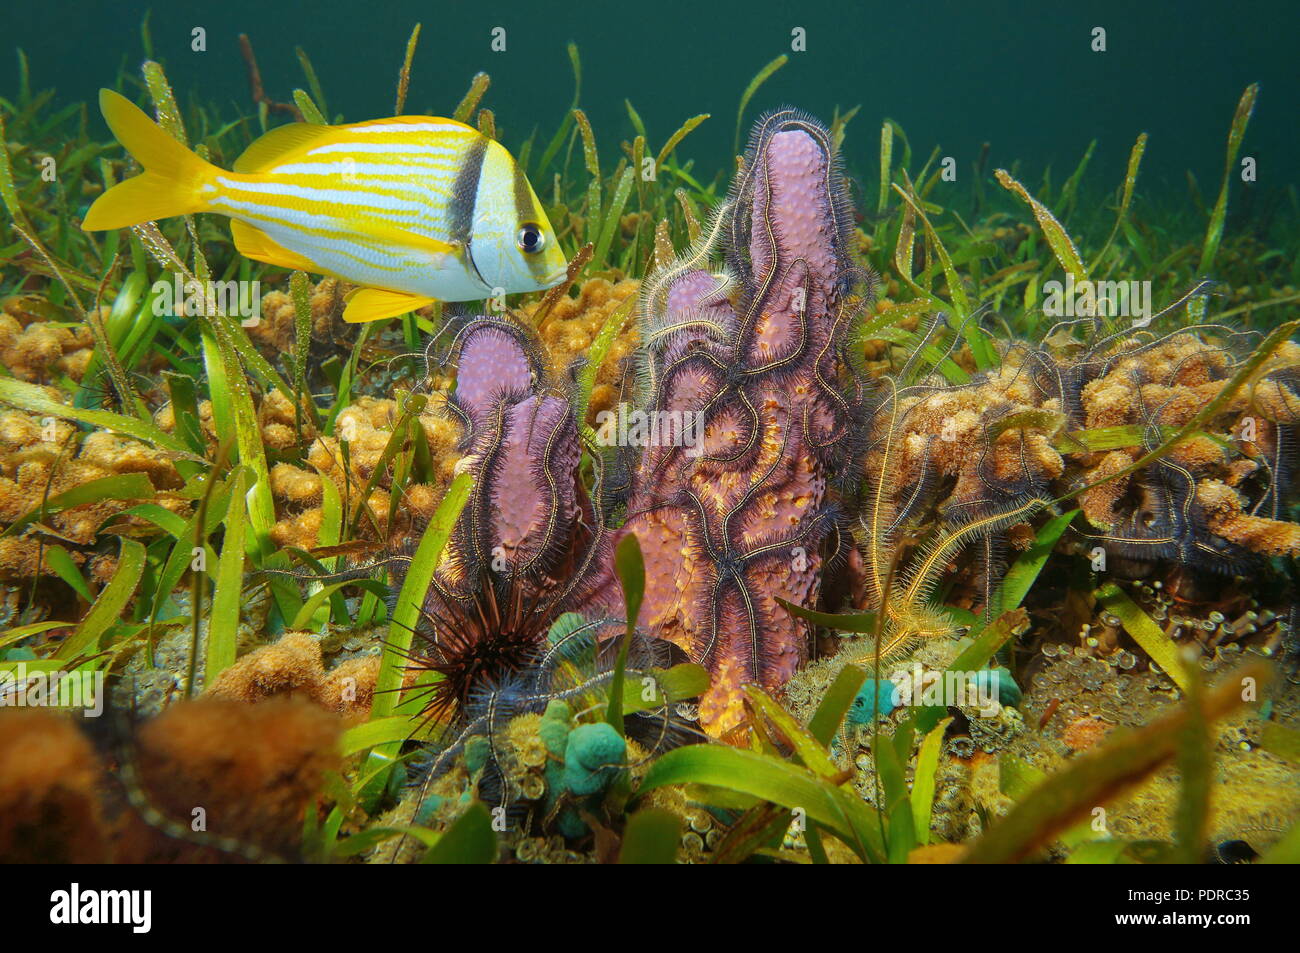 A branching tube sponge covered by brittle stars with a tropical fish (porkfish) underwater in the Caribbean sea, Panama, Central America Stock Photo